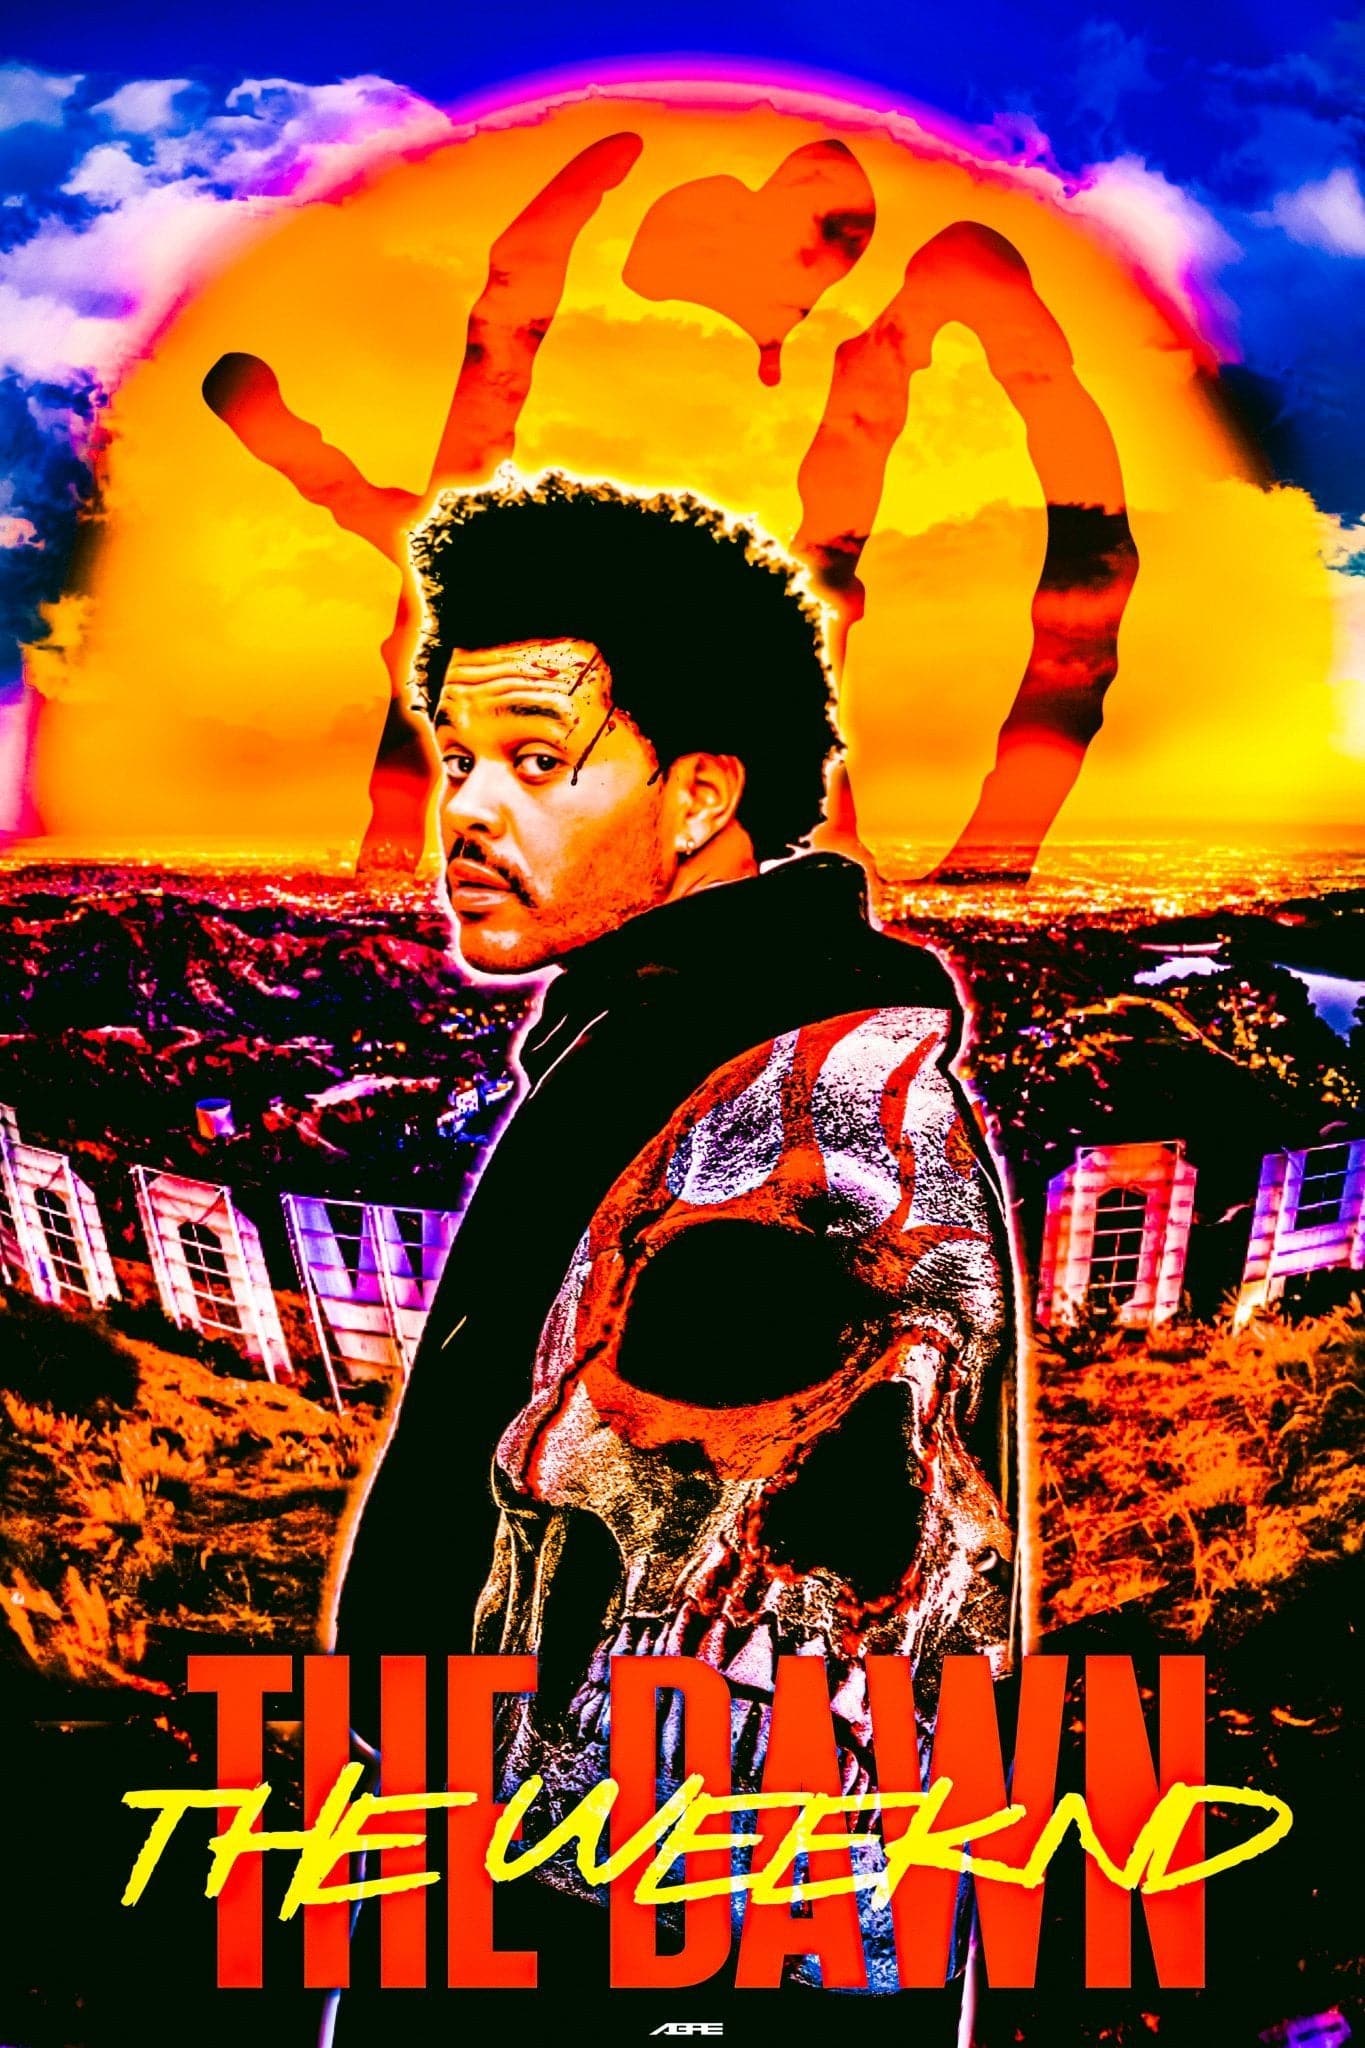 The Weeknd Poster, Buy The Dawn Music Artist Poster